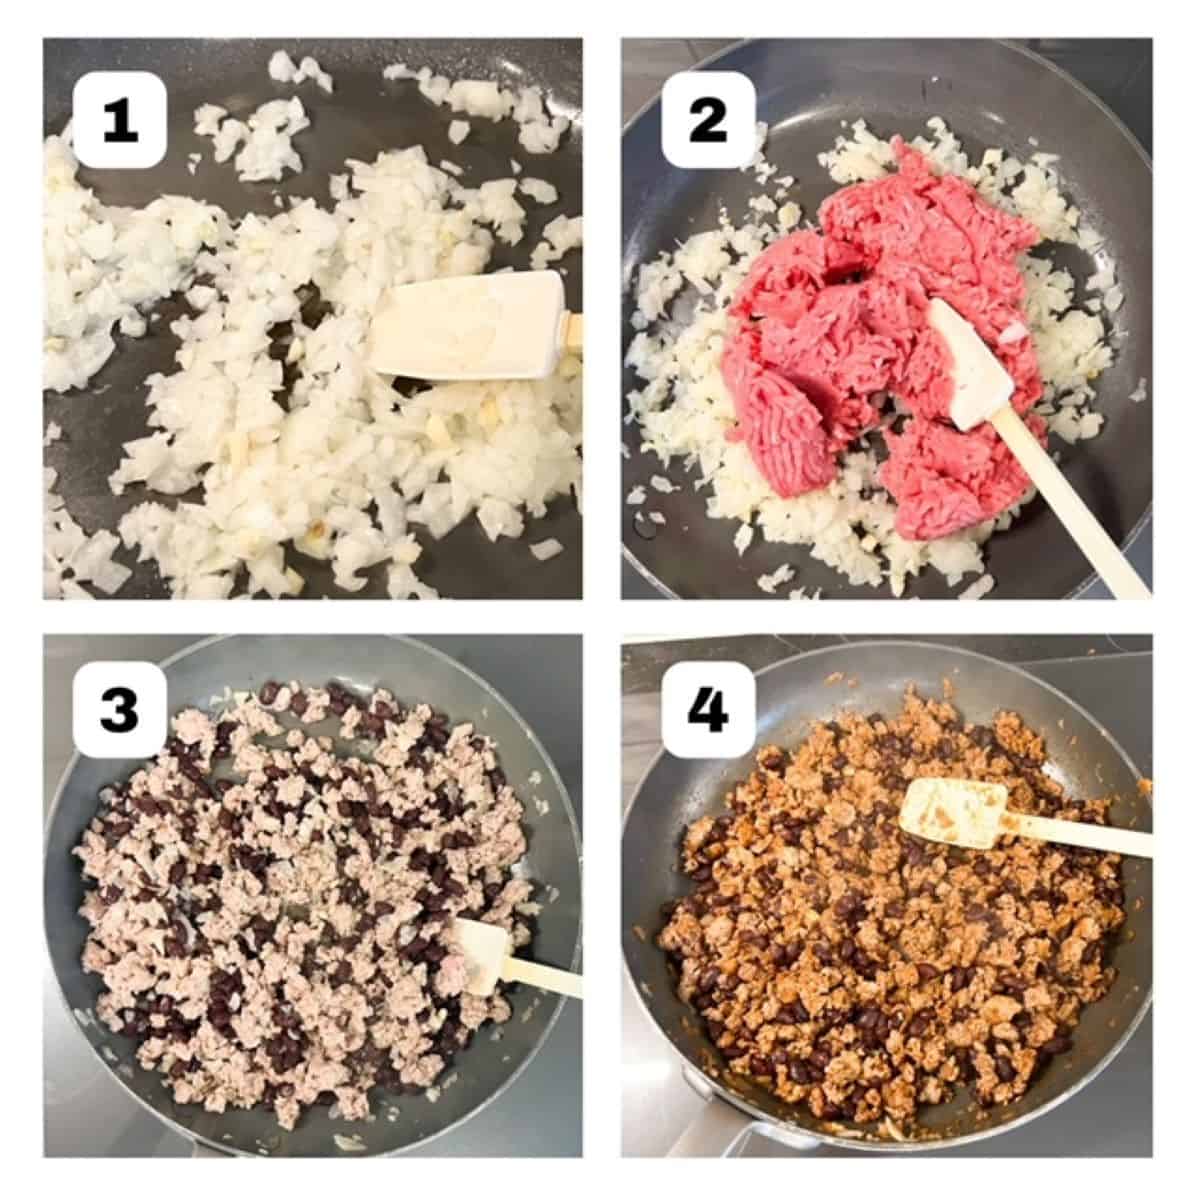 Four process shots showing steps to make ground turkey taco meat with black beans.